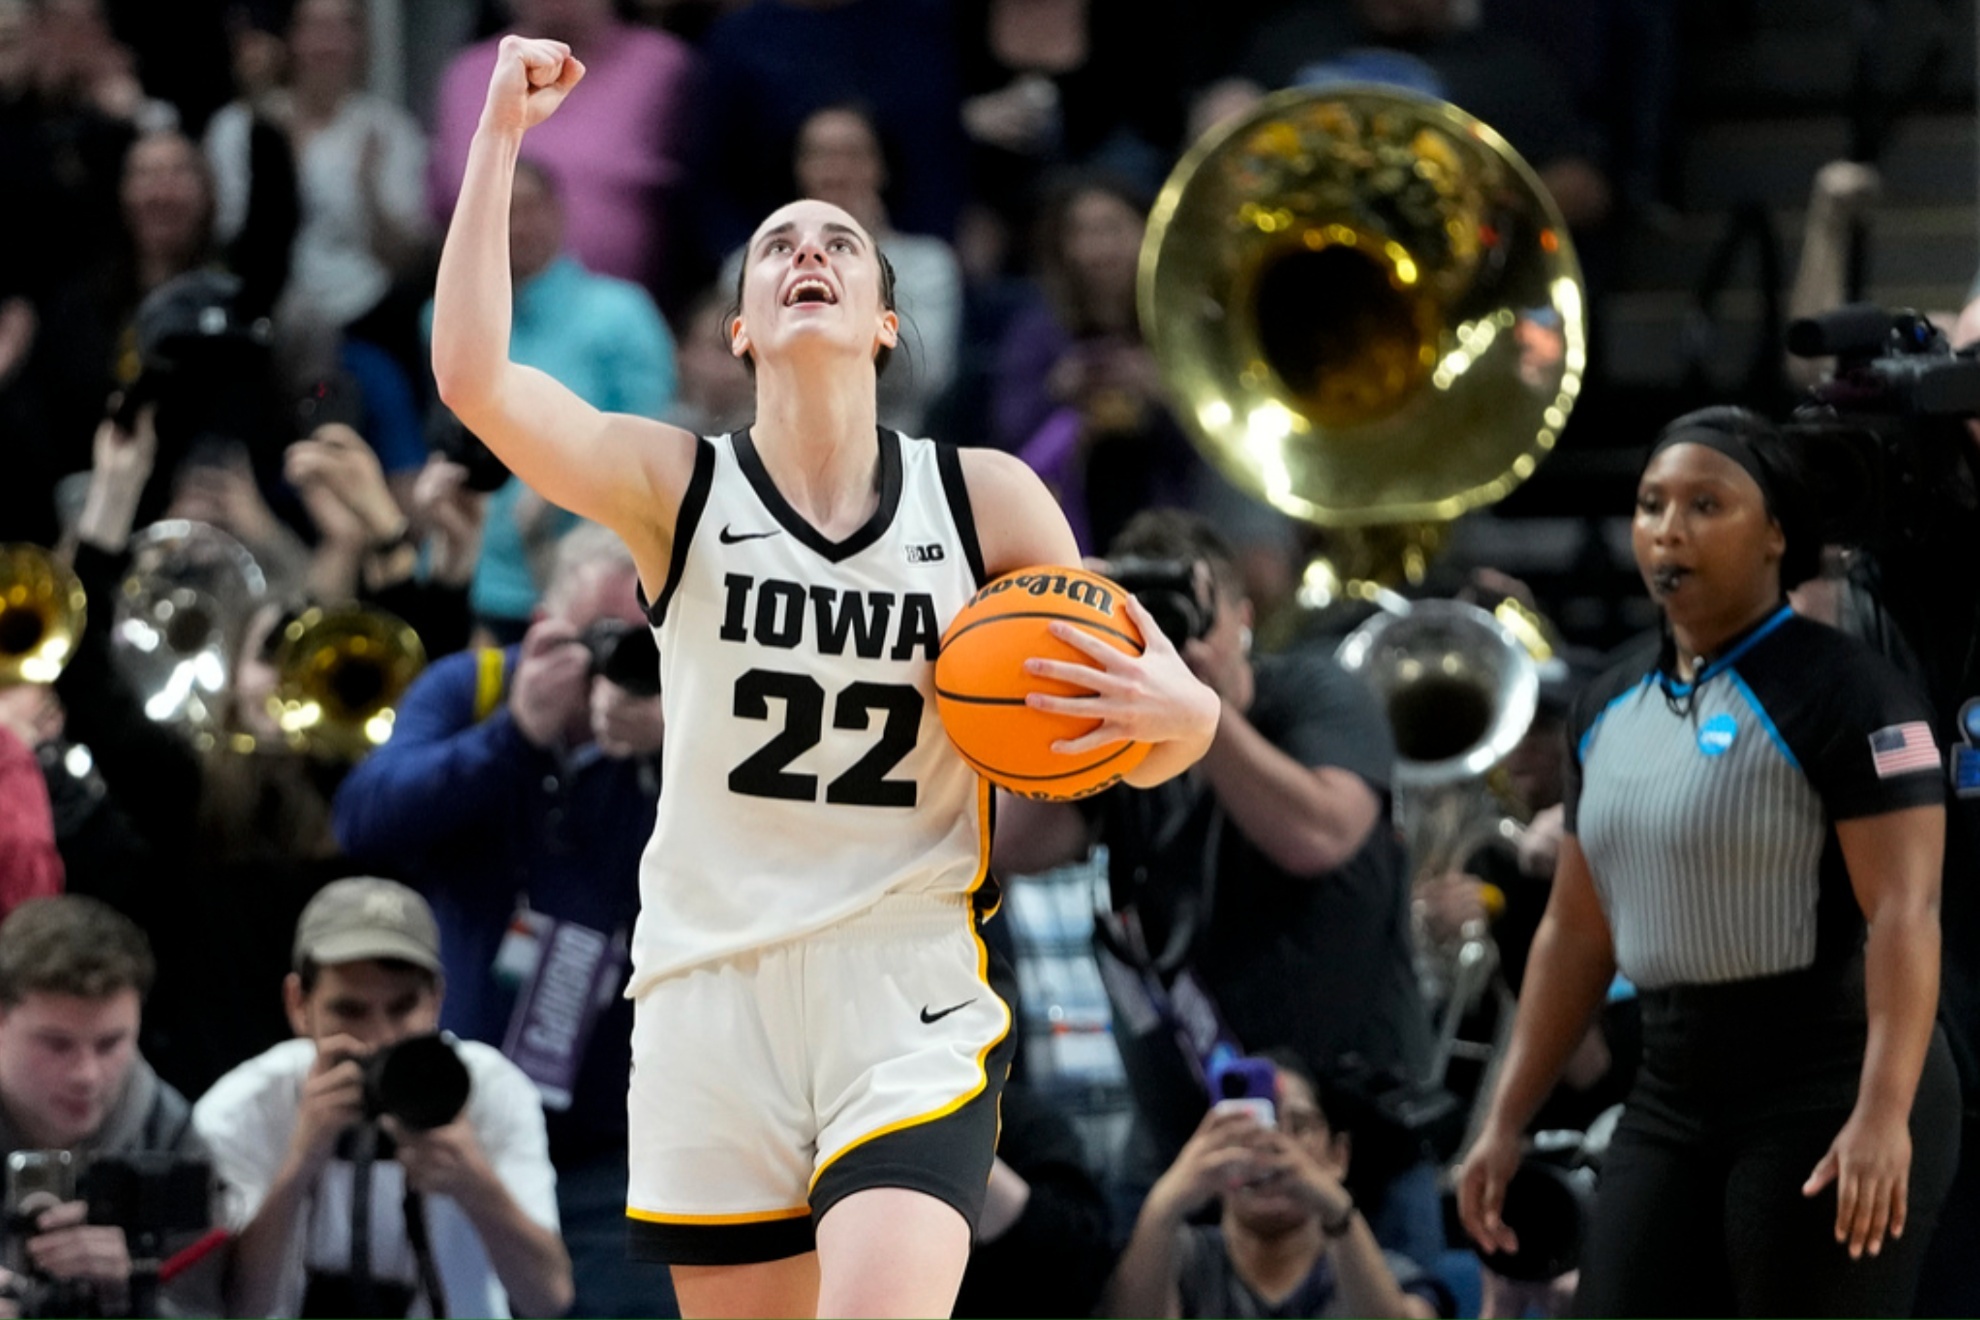 Caitlin Clarks 22 will be retired by the Iowa Hawkeyes